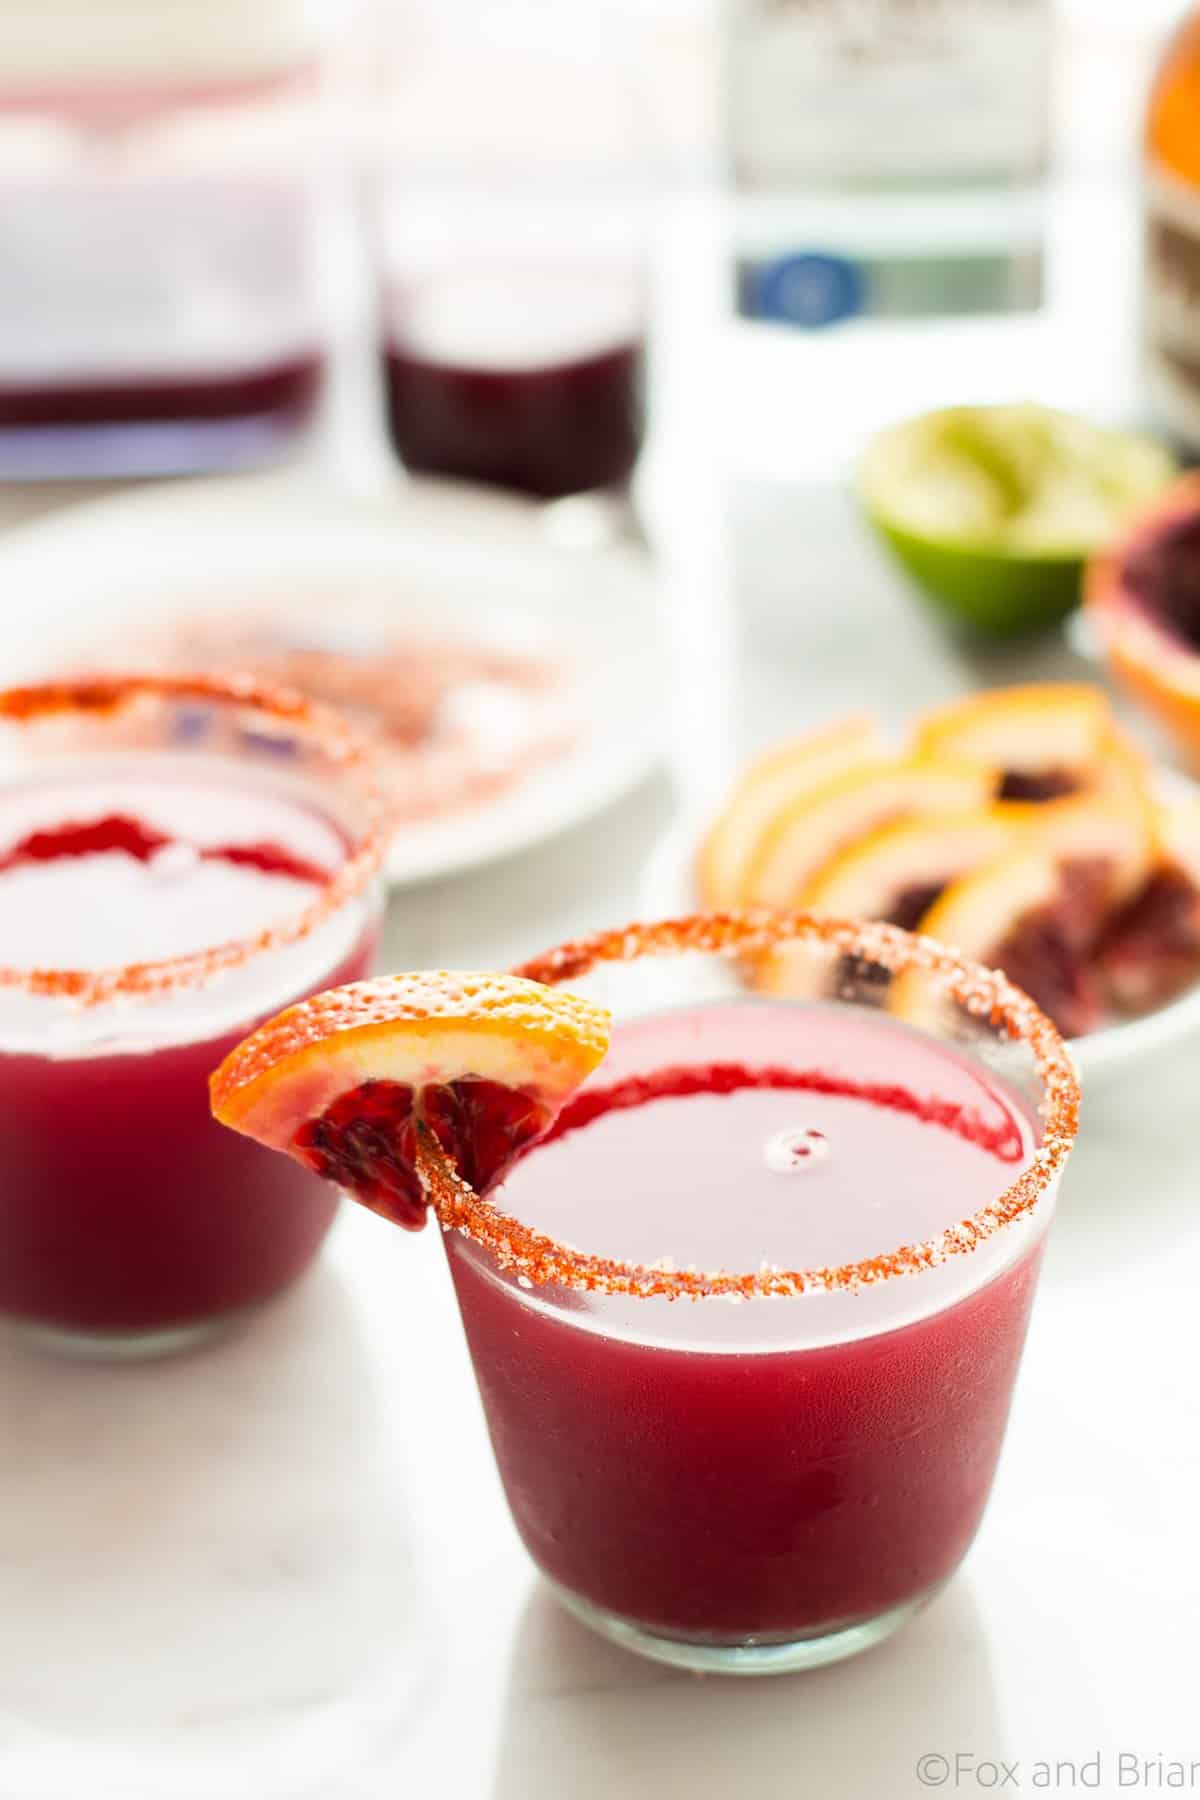 This Fresh Blood Orange Margarita has an optional smoky salted rim. The fresh citrus flavors of the blood orange make this a sweet and tart cocktail, and the smoked paprika salted rim gives it a little something extra.